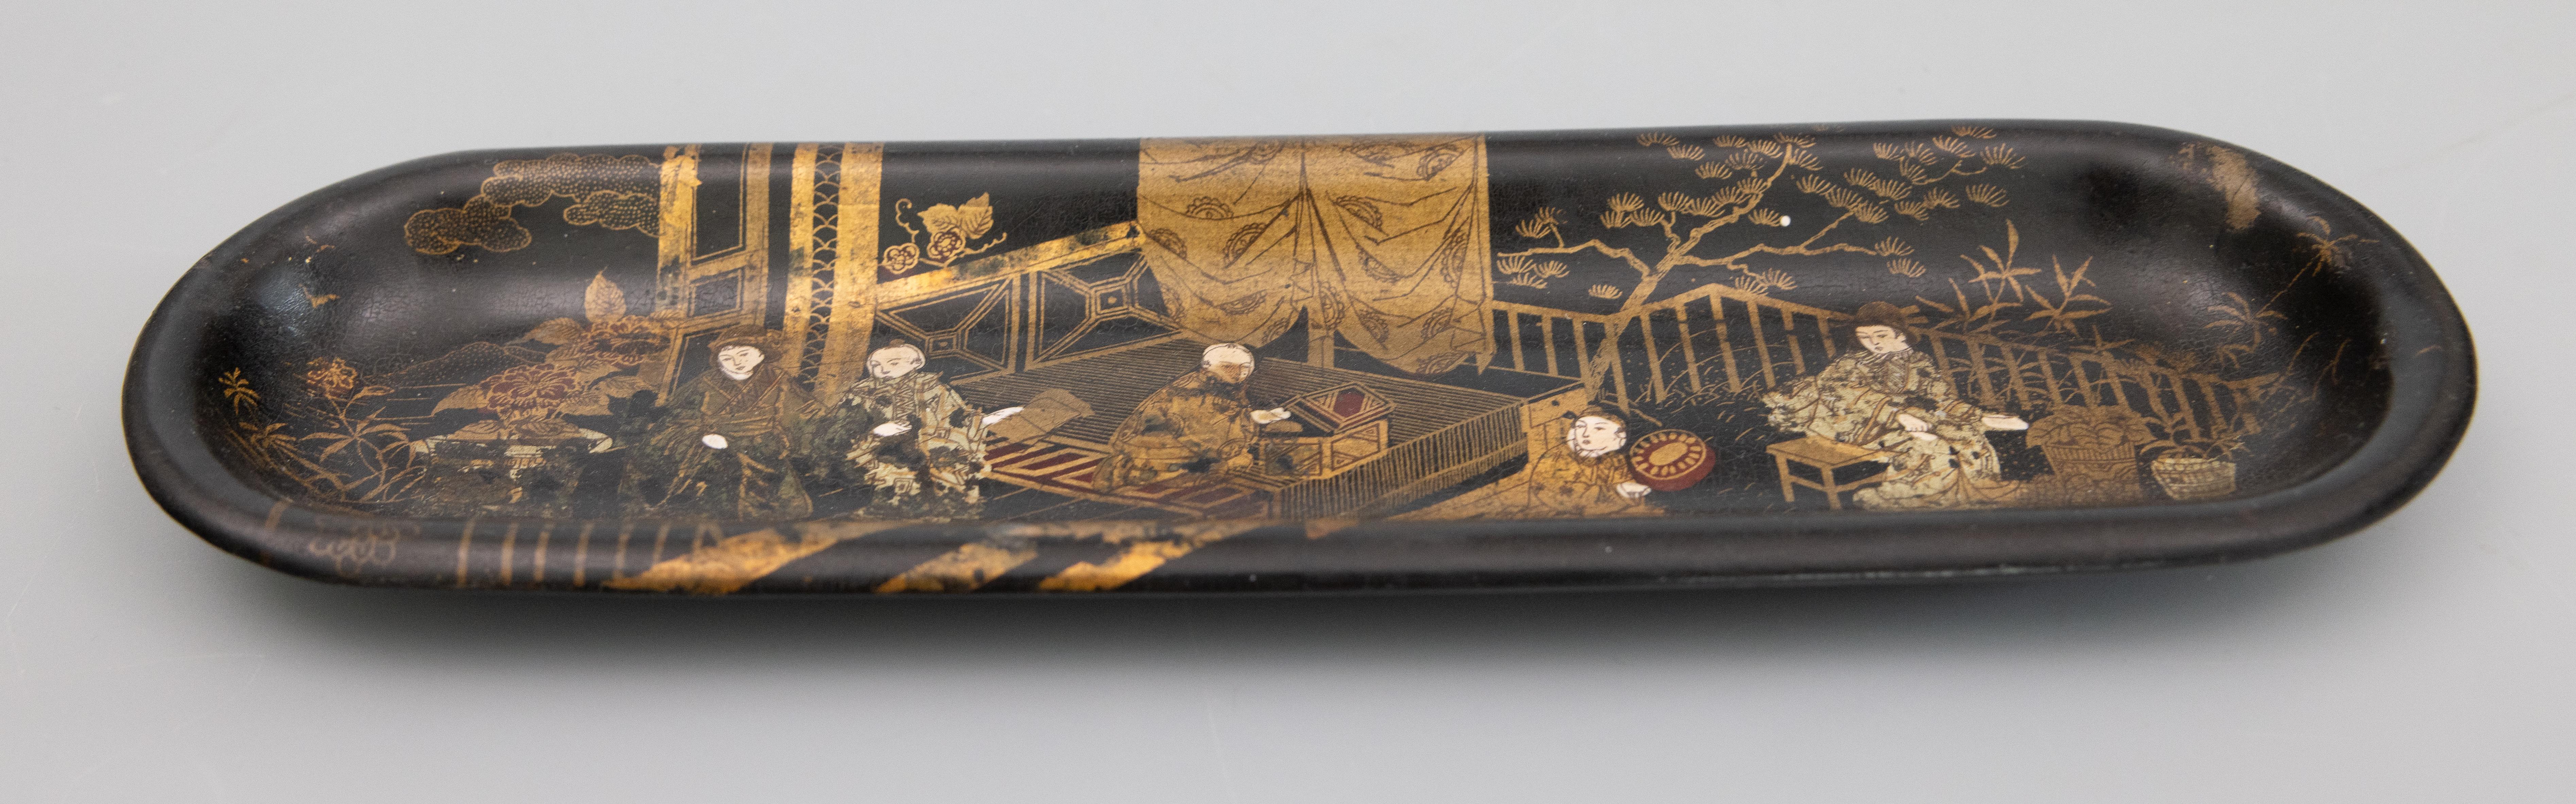 A superb antique English papier mache pen tray with an Asian chinoiserie design. It is hand made depicting hand painted gilt figures in a garden pagoda scene with Japanese maples on a black ebonized background. It would make a fabulous gift and be a